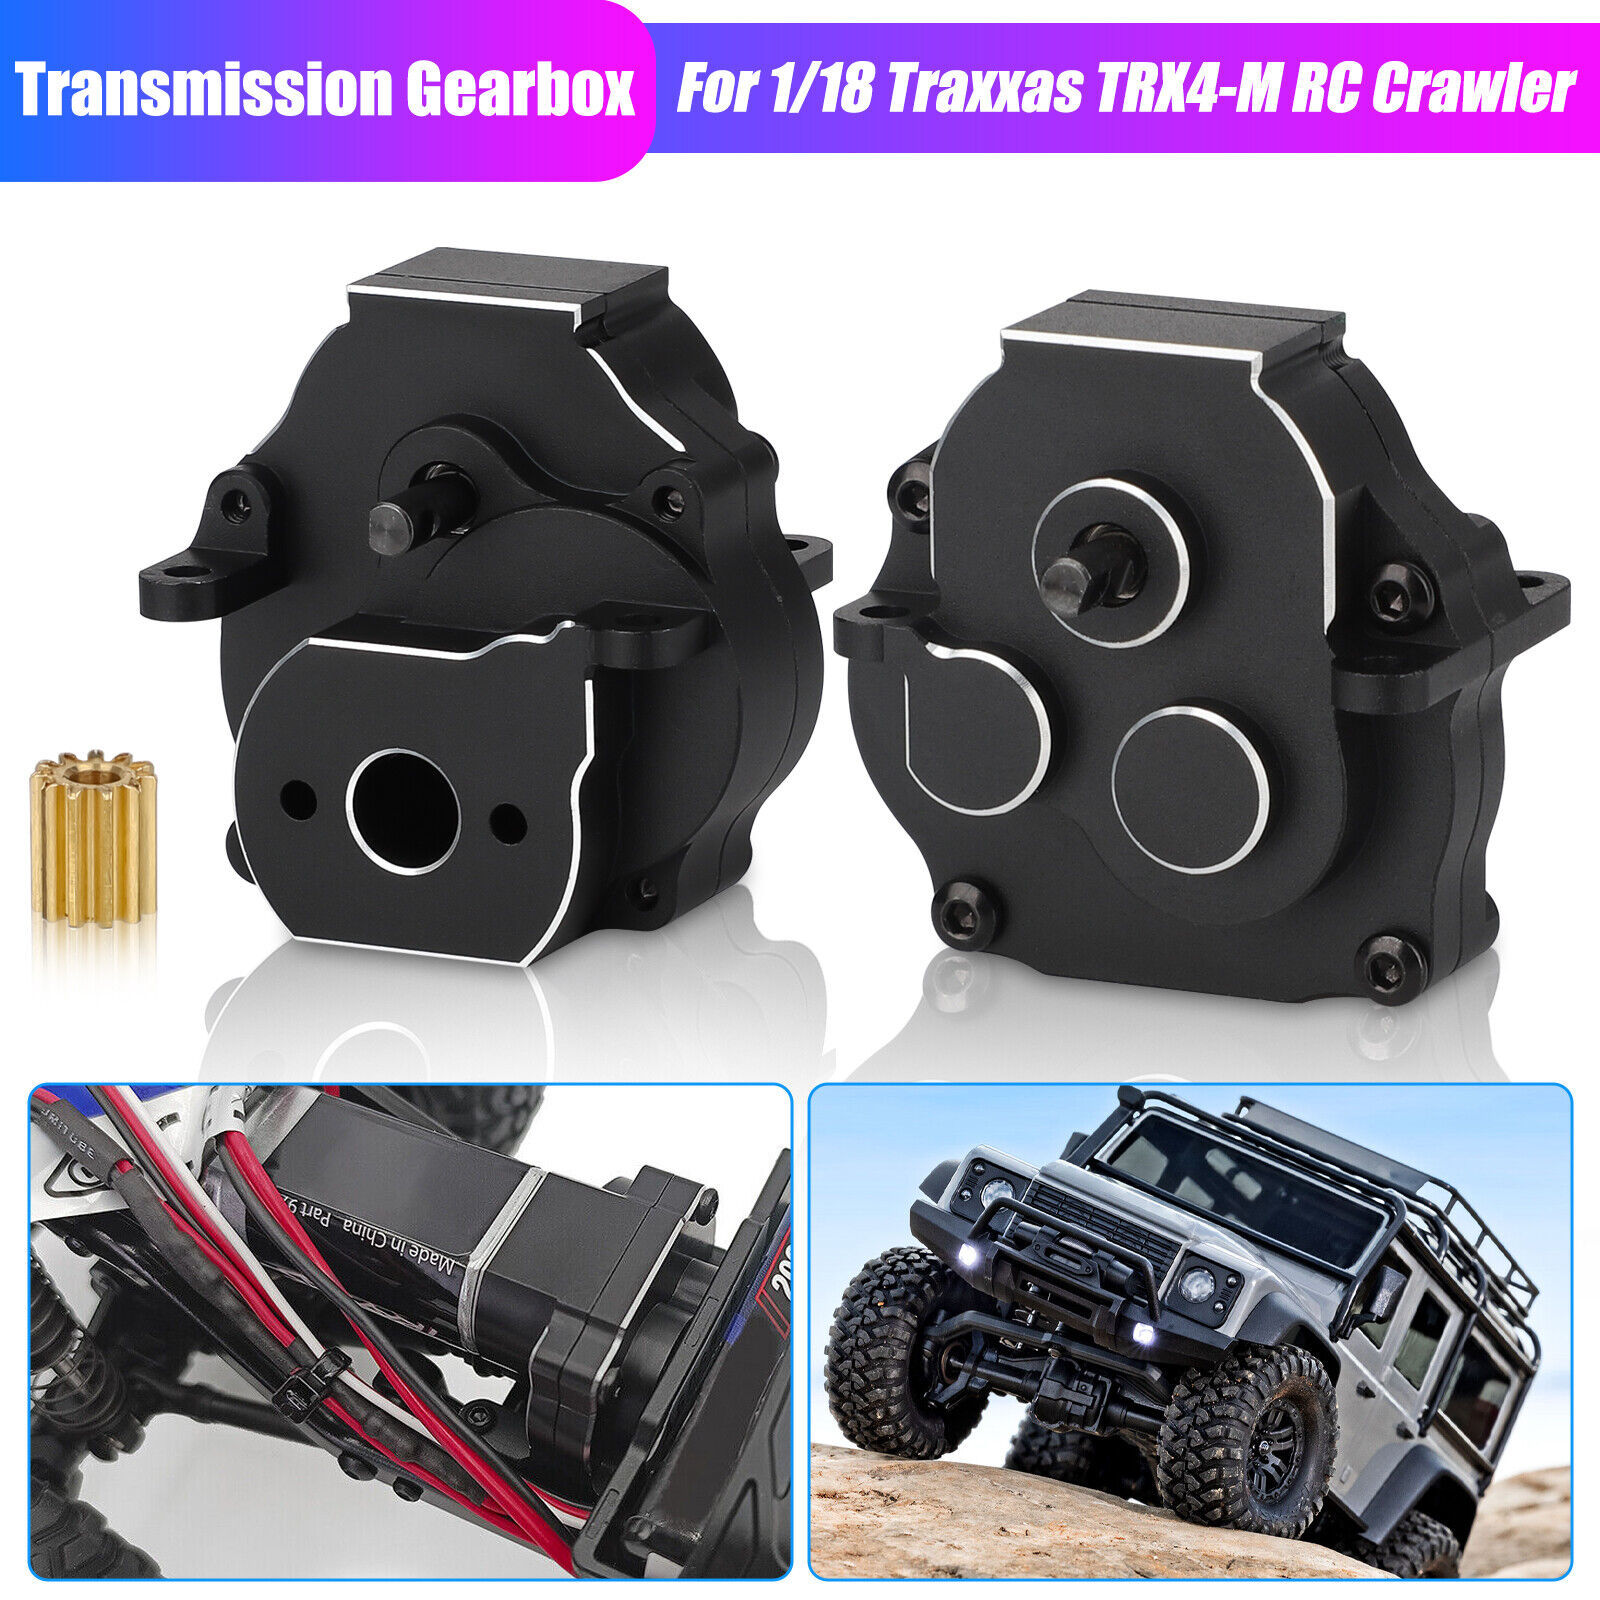 Metal Transmission Case Gearbox for 1/18 Traxxas TRX4-M RC Crawler Car Upgrade - $34.99